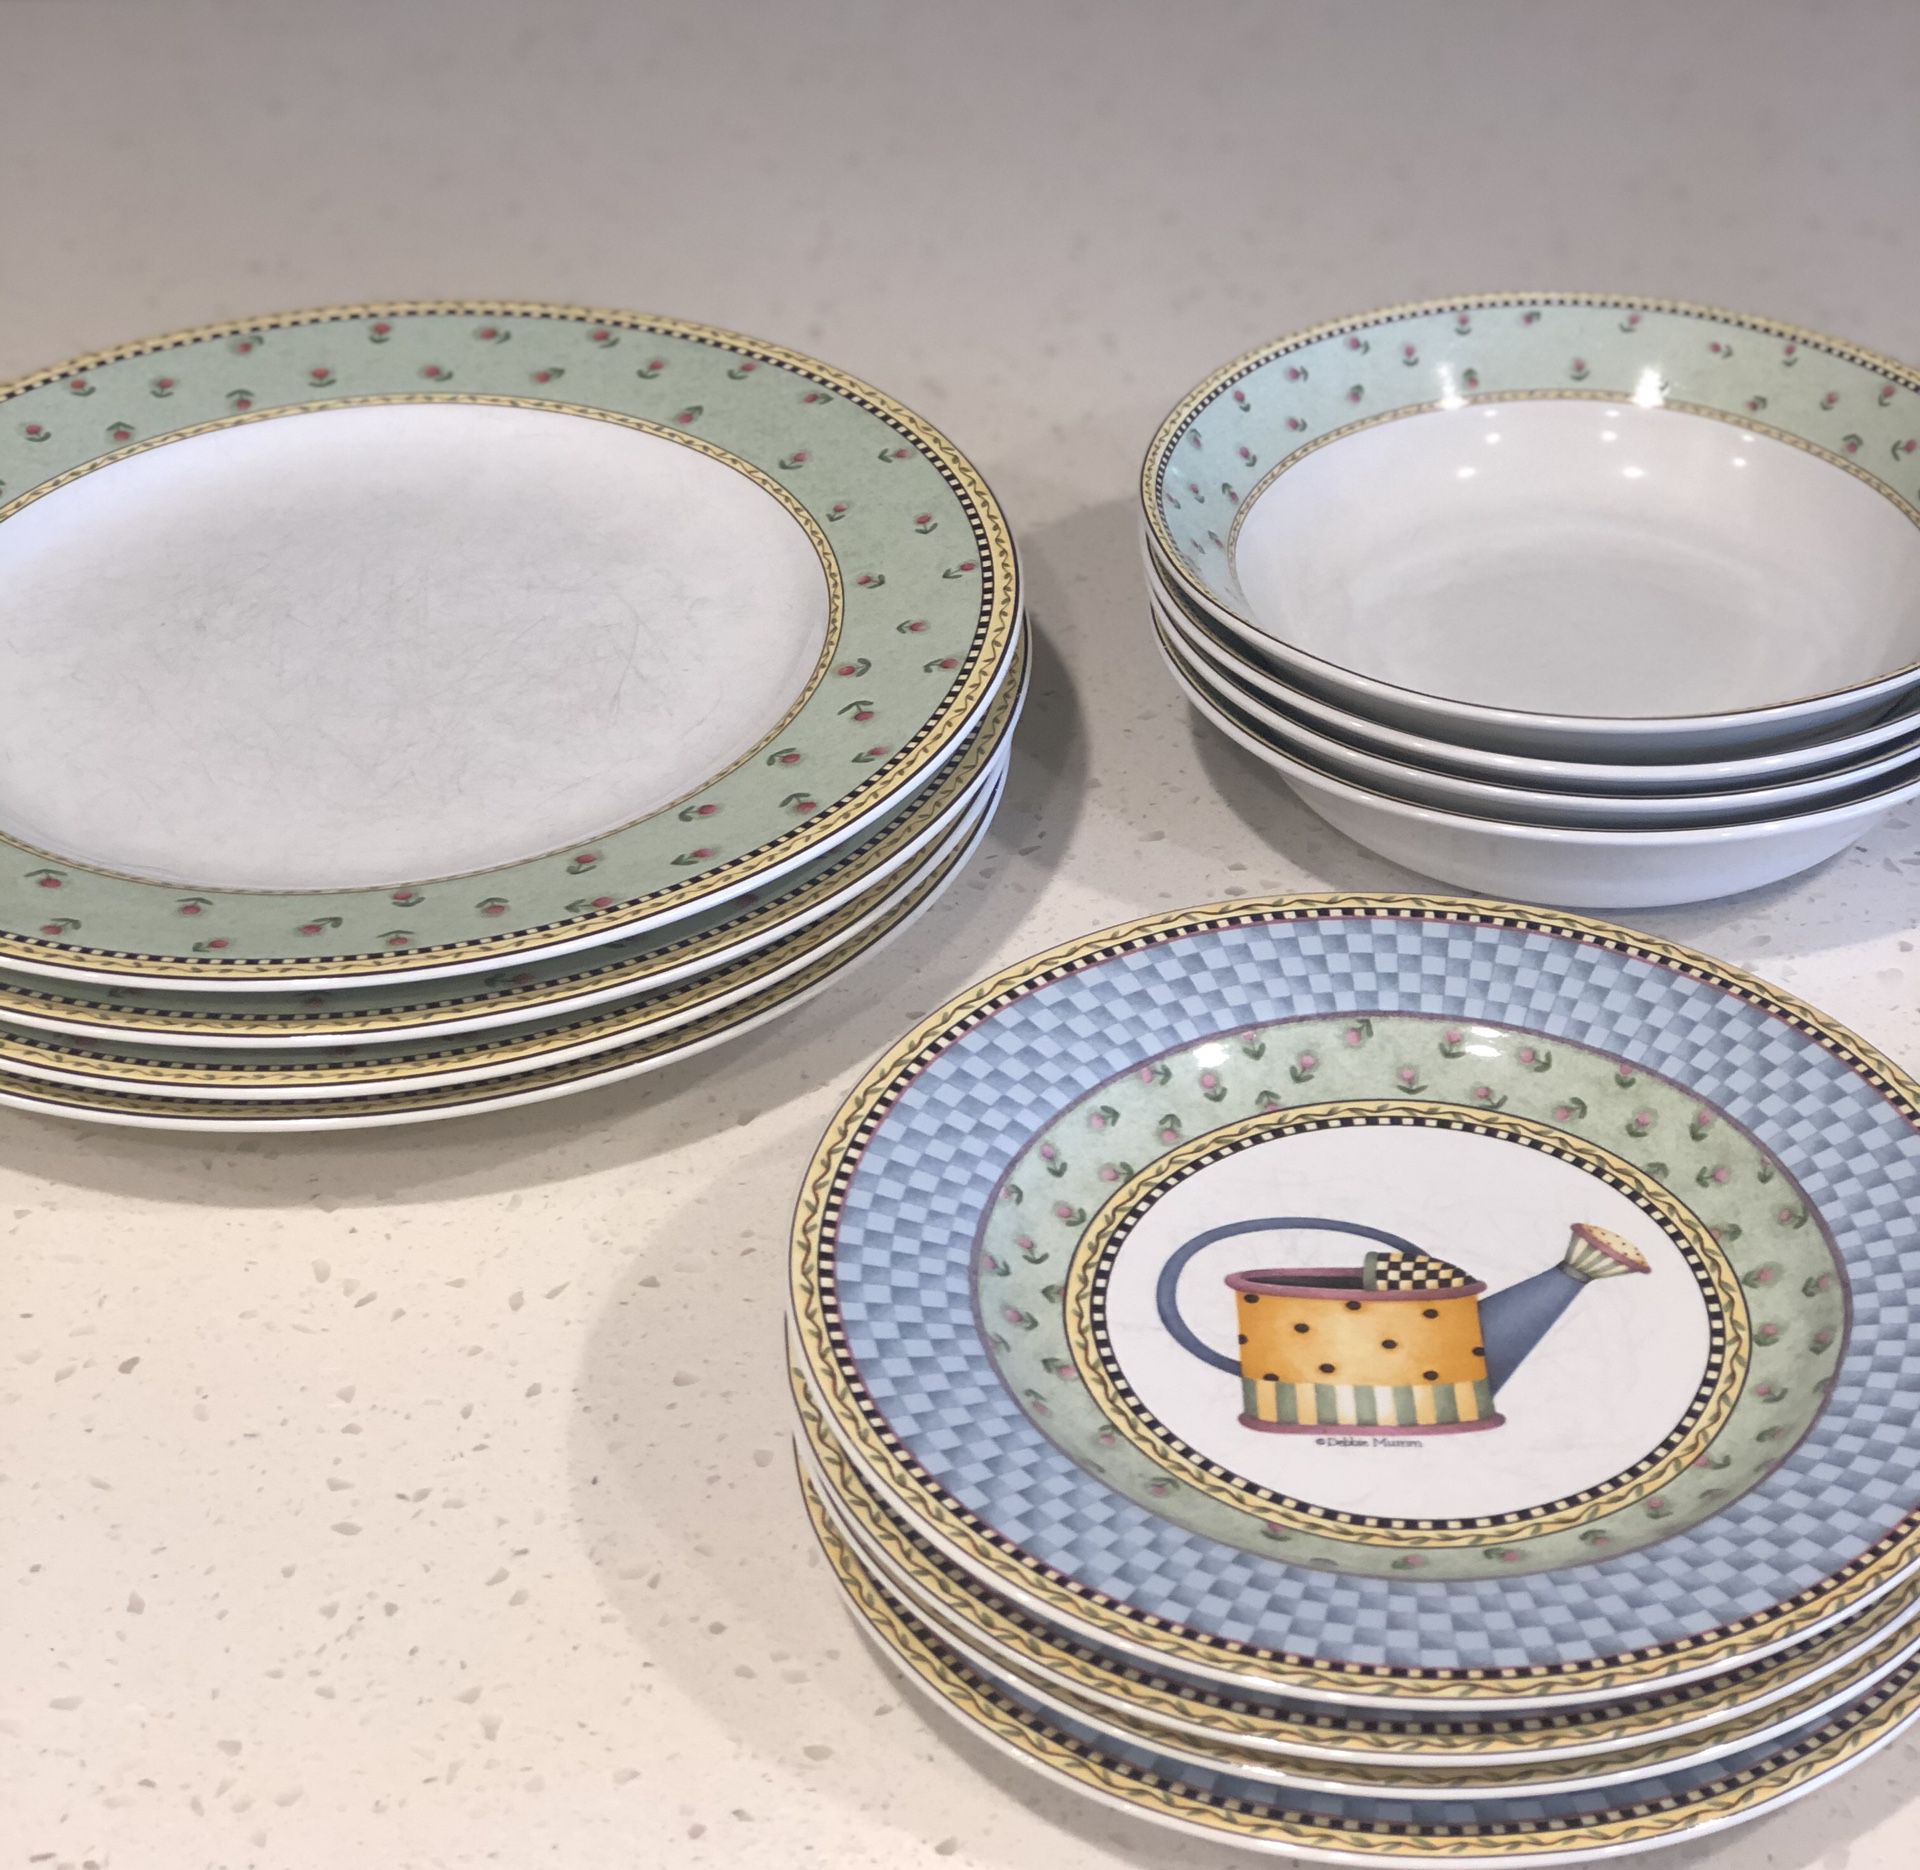 Cute 12 piece place setting